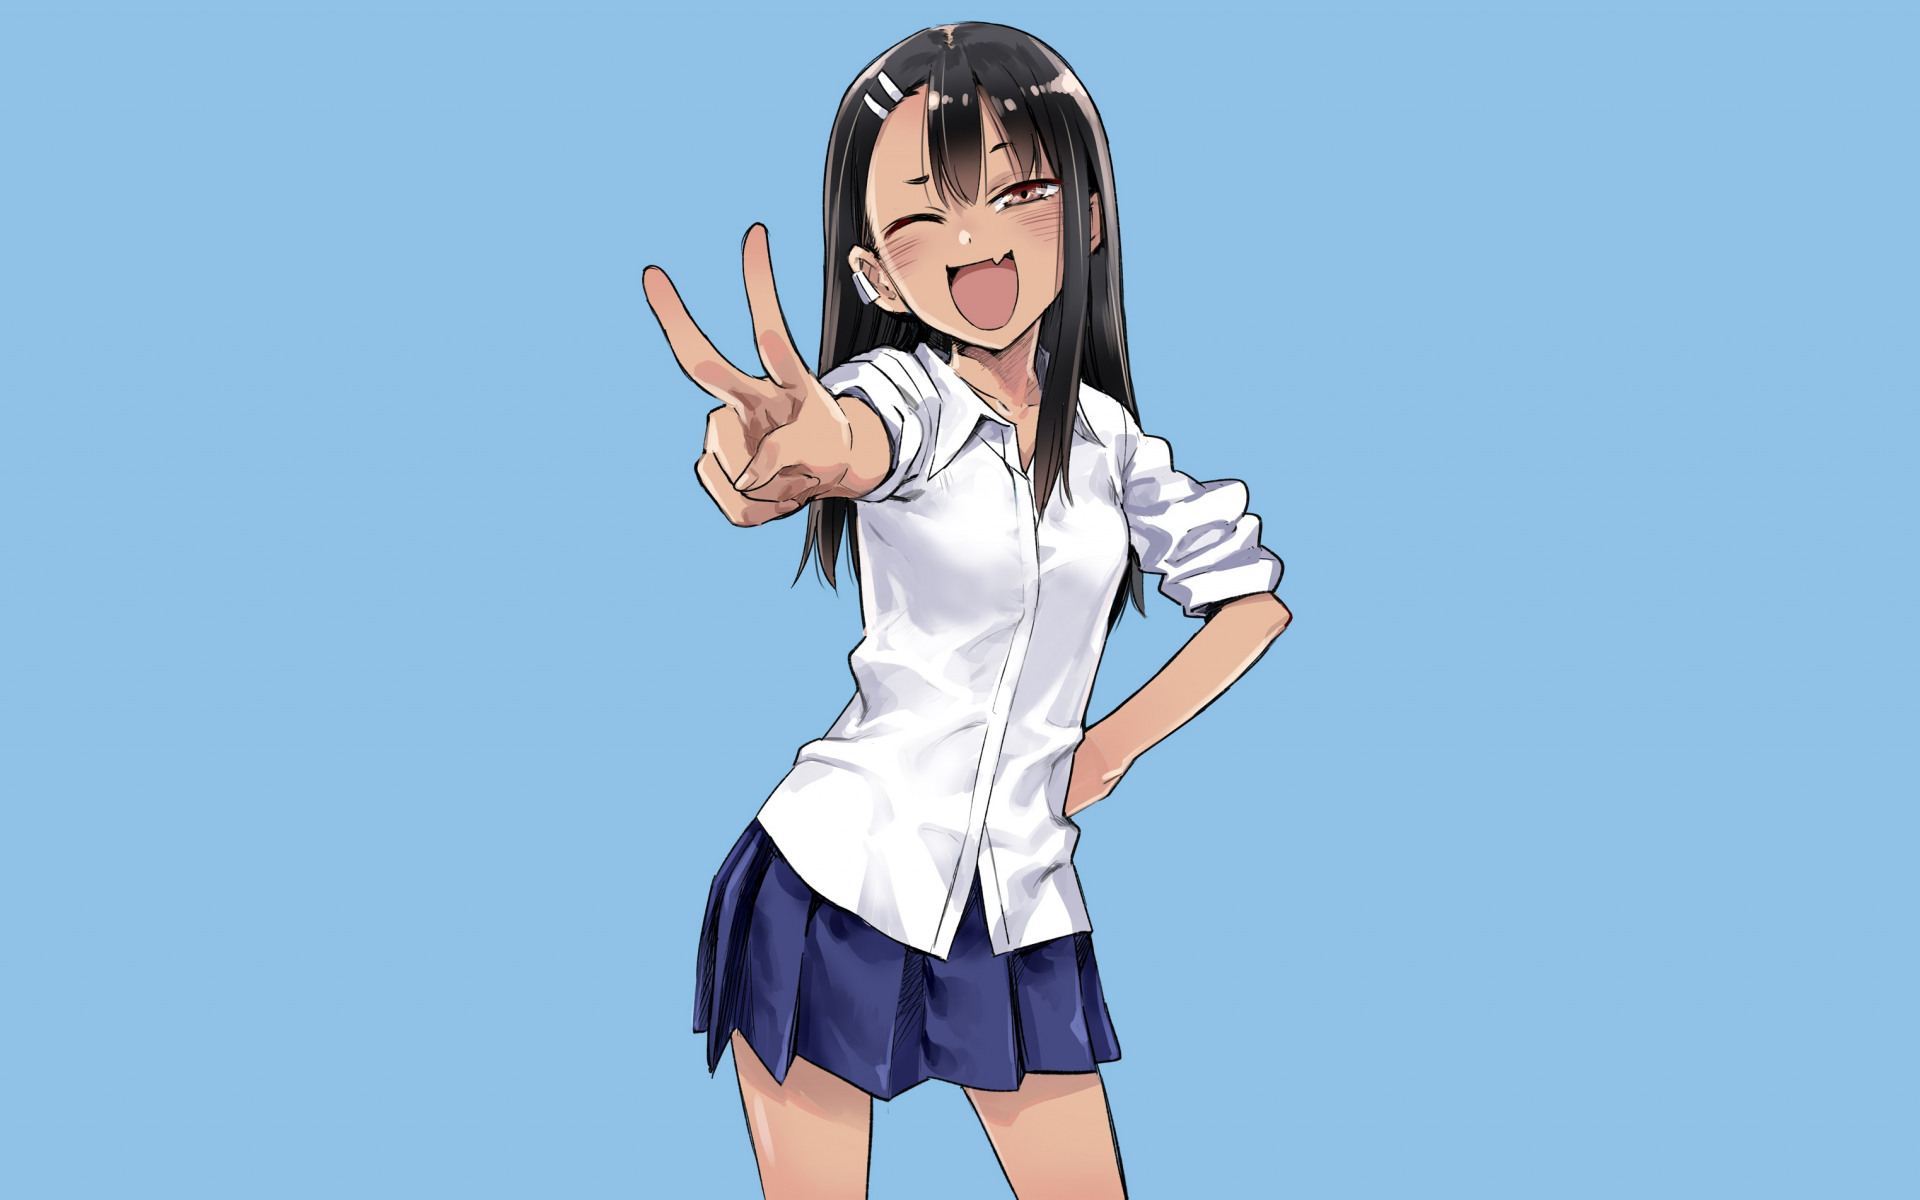 Ijiranaide, Nagatoro-san 2nd Attack - Don't Toy with Me, Miss